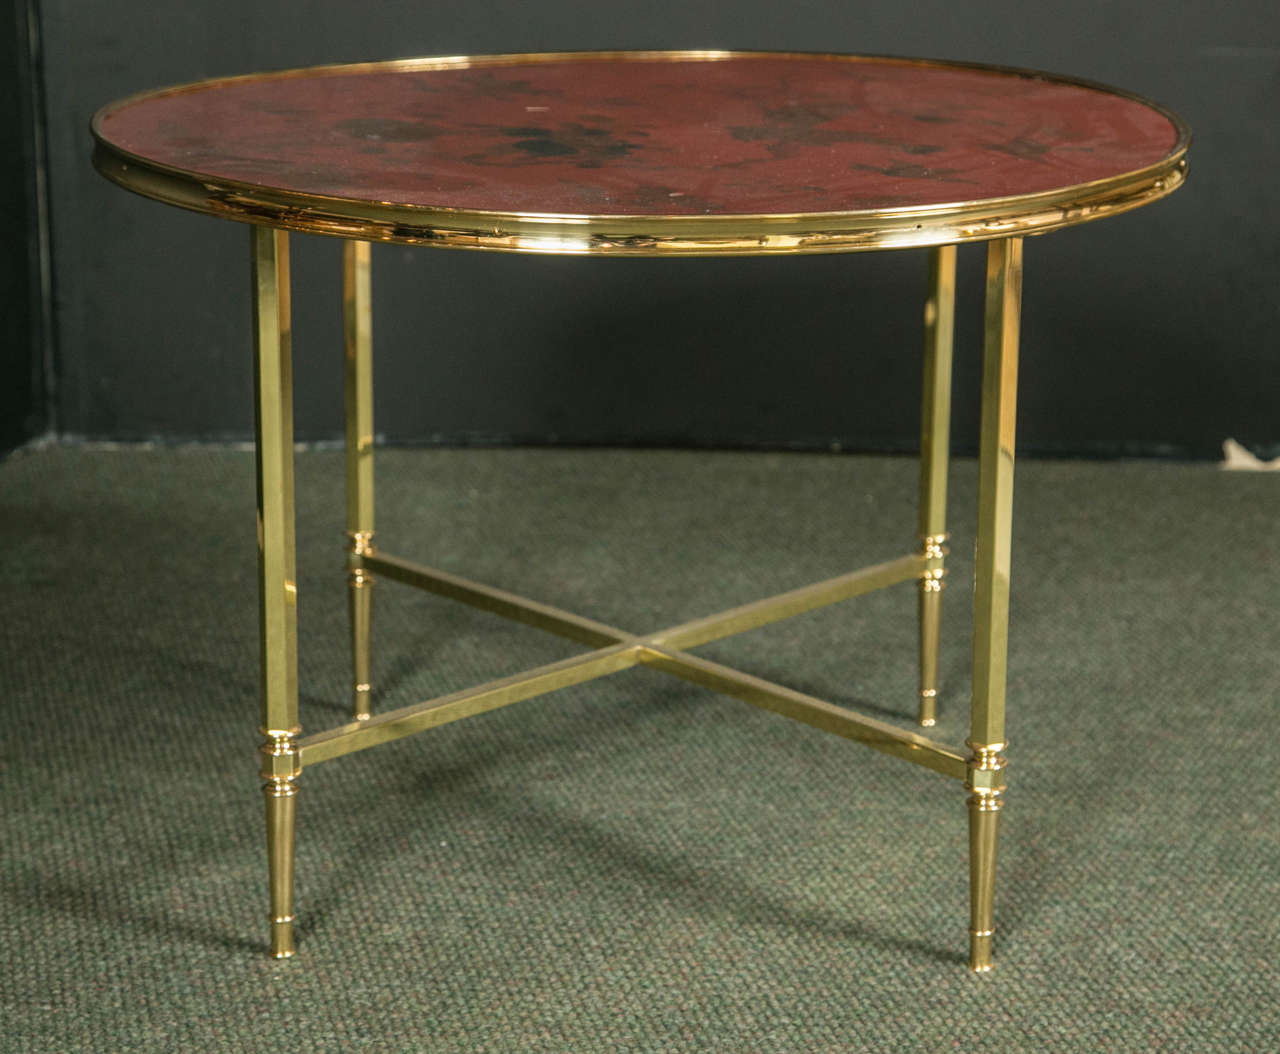 A post war French circular coffee table.   The table has a polished brass base and red lacquer chinoiserie top depicting a nature inspired scene with birds.